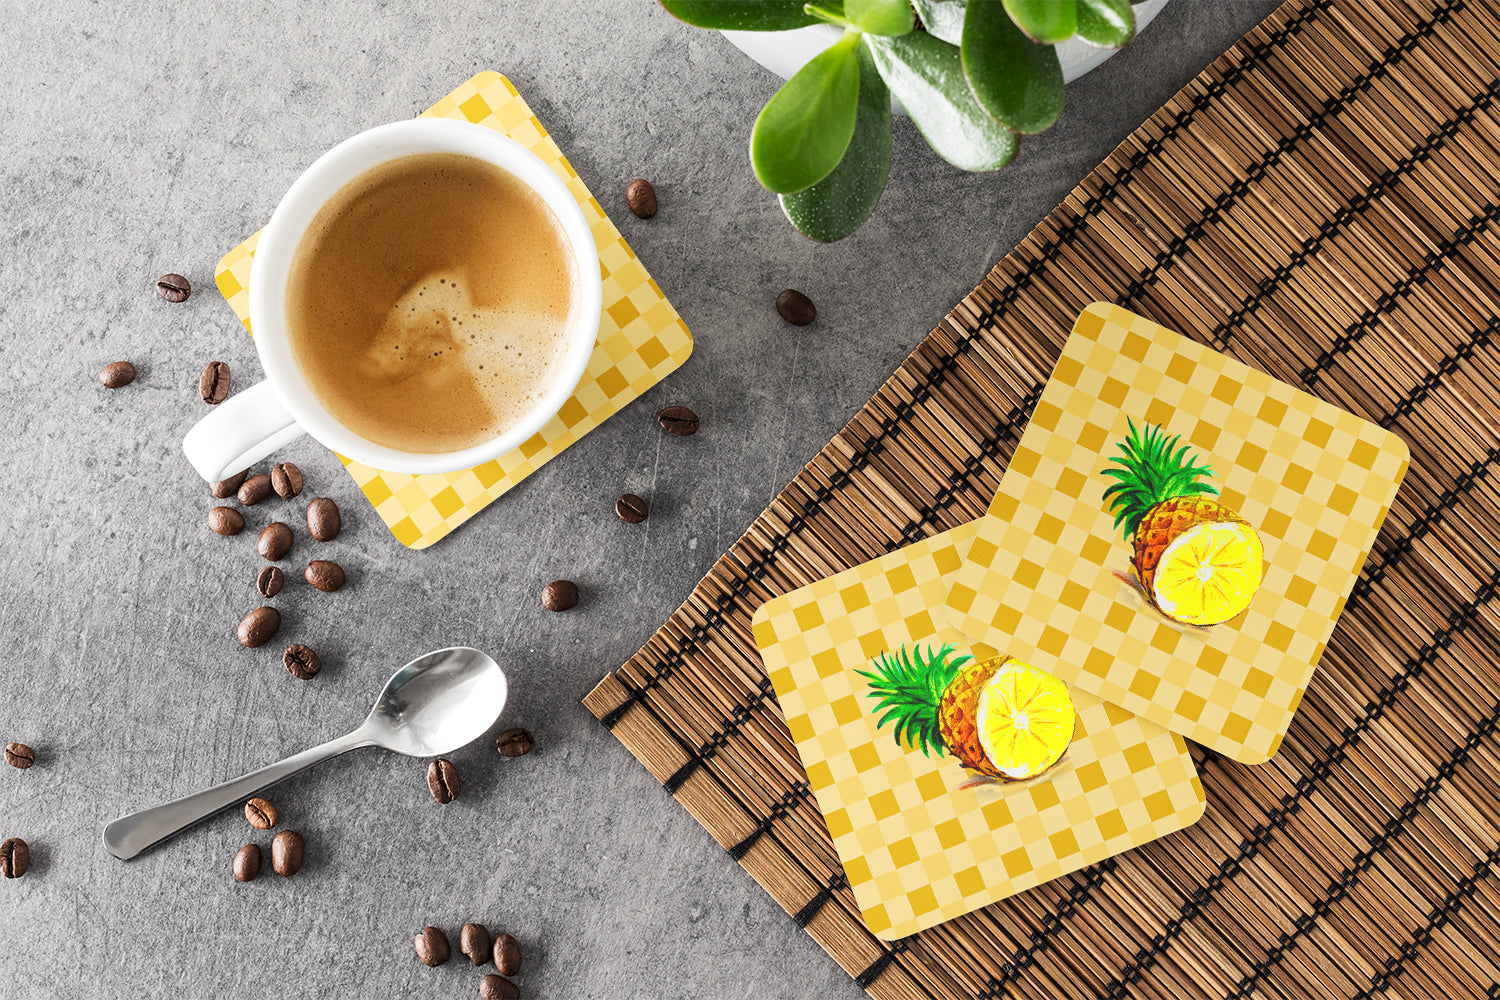 Top of Pineapple Cut on Basketweave Foam Coaster Set of 4 BB7248FC - the-store.com